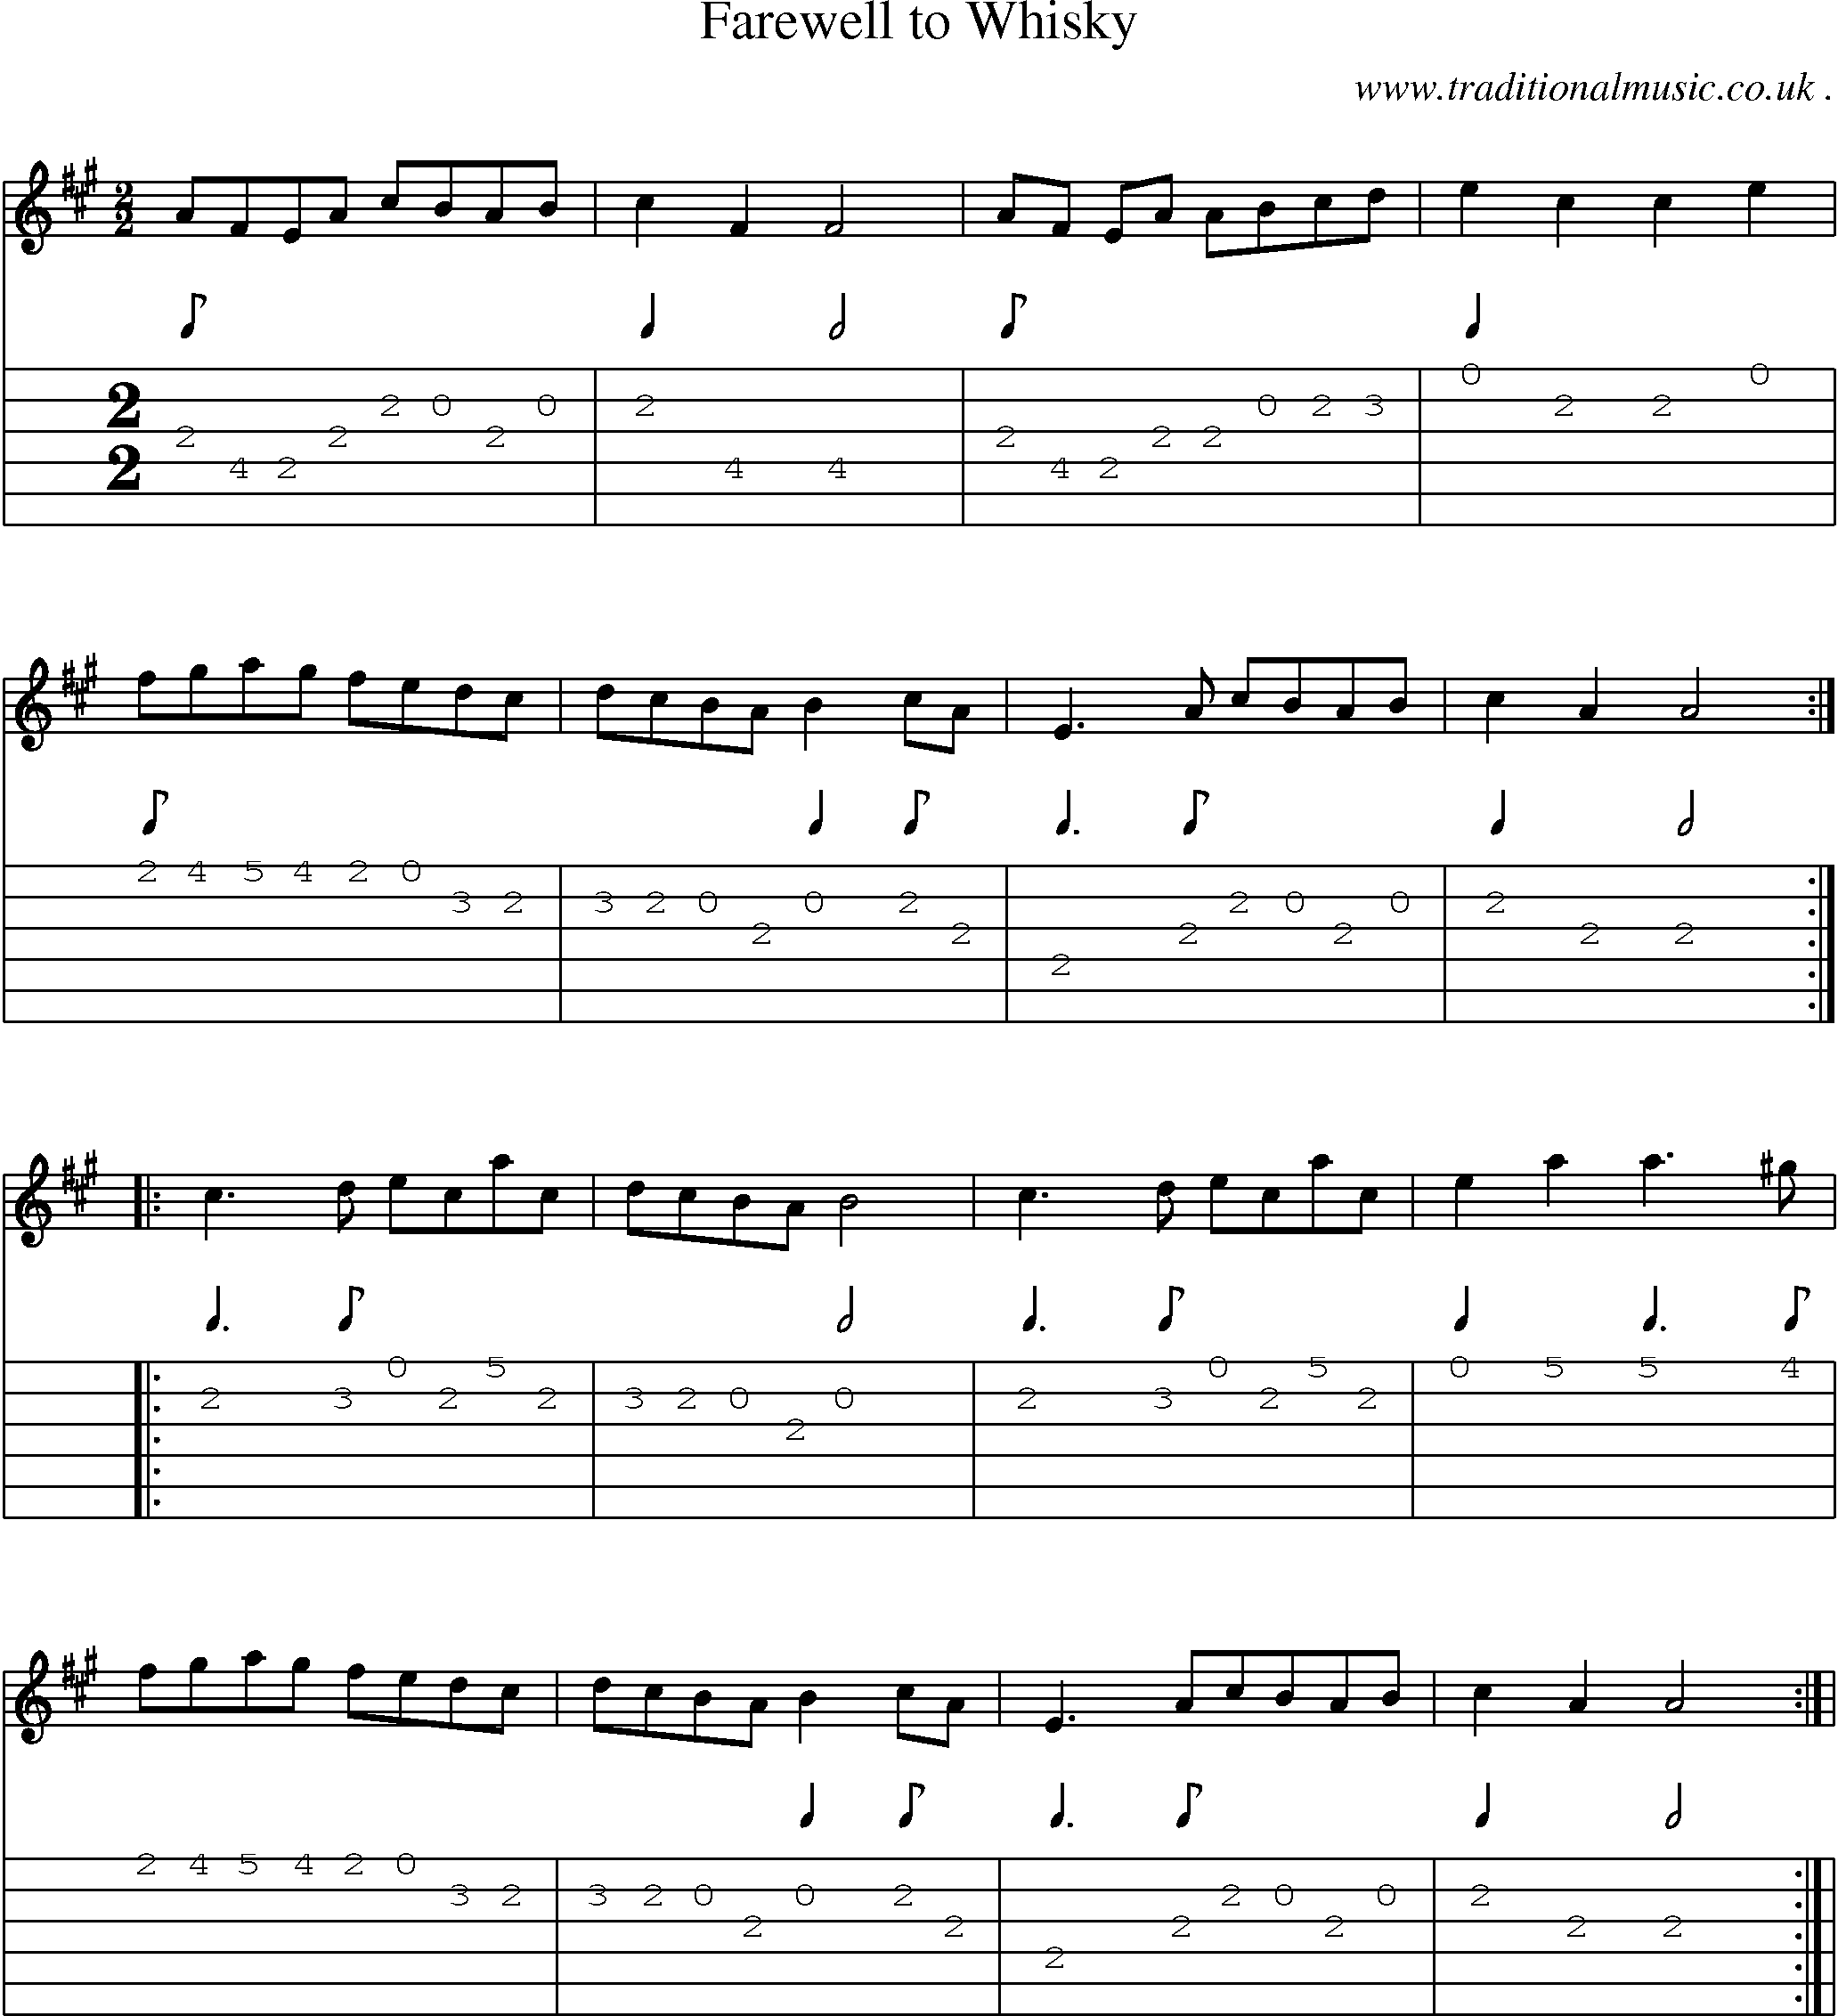 Sheet-Music and Guitar Tabs for Farewell To Whisky